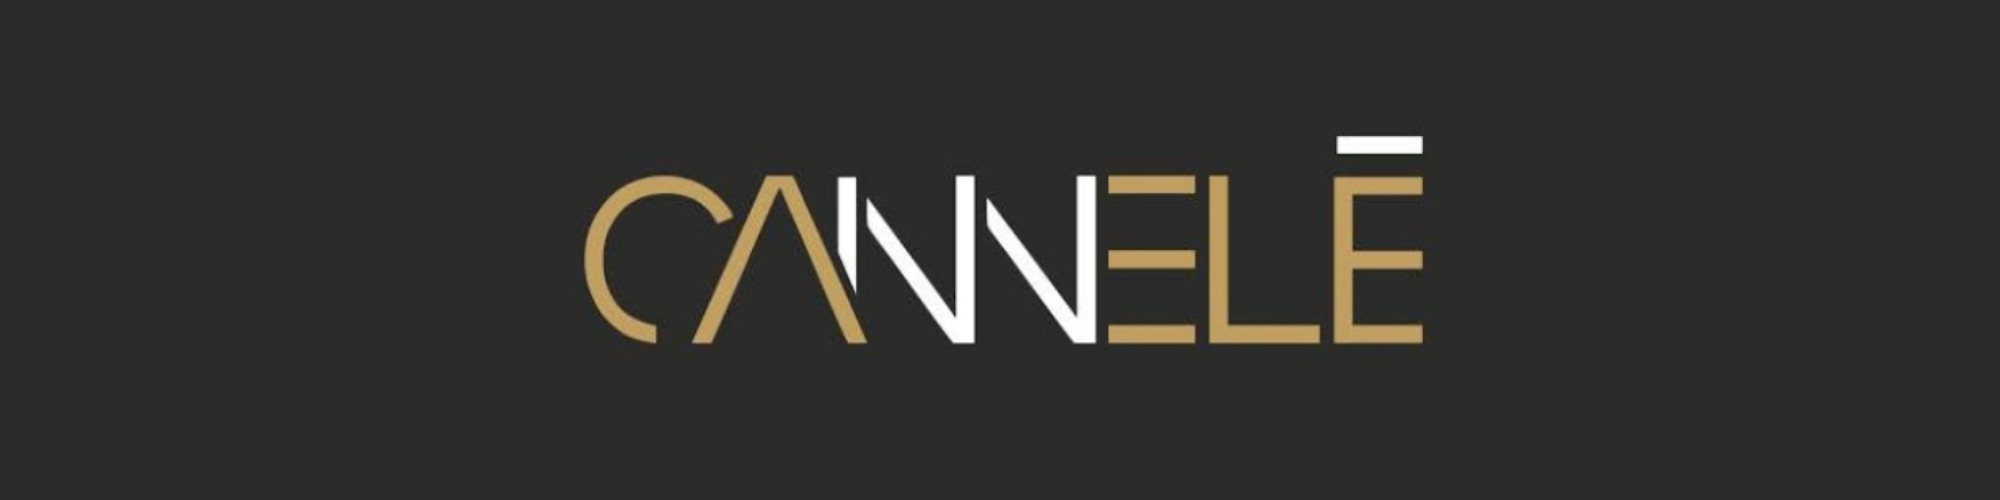 banners cannele pc 1